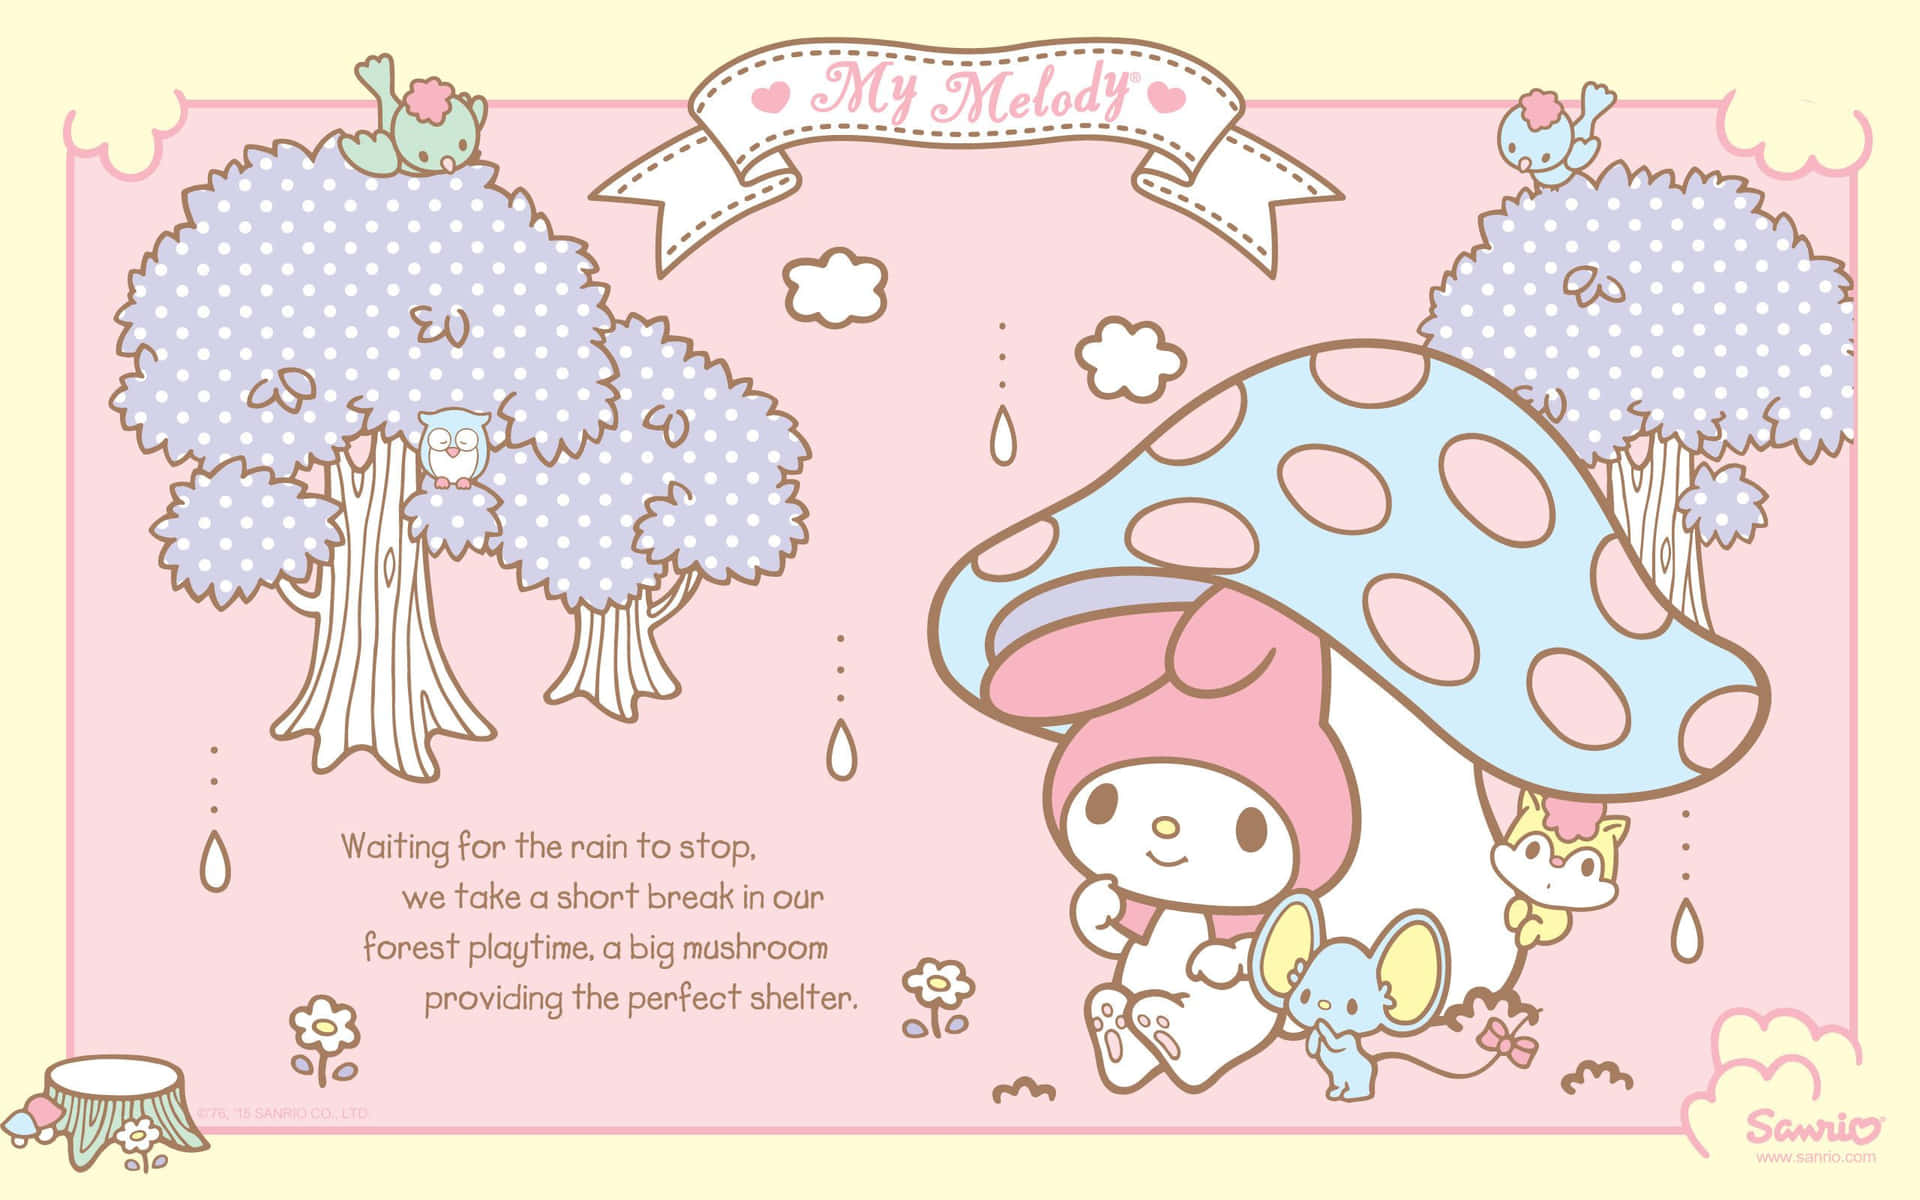 A Pink And White Cartoon With A Mushroom And A Teddy Bear Wallpaper